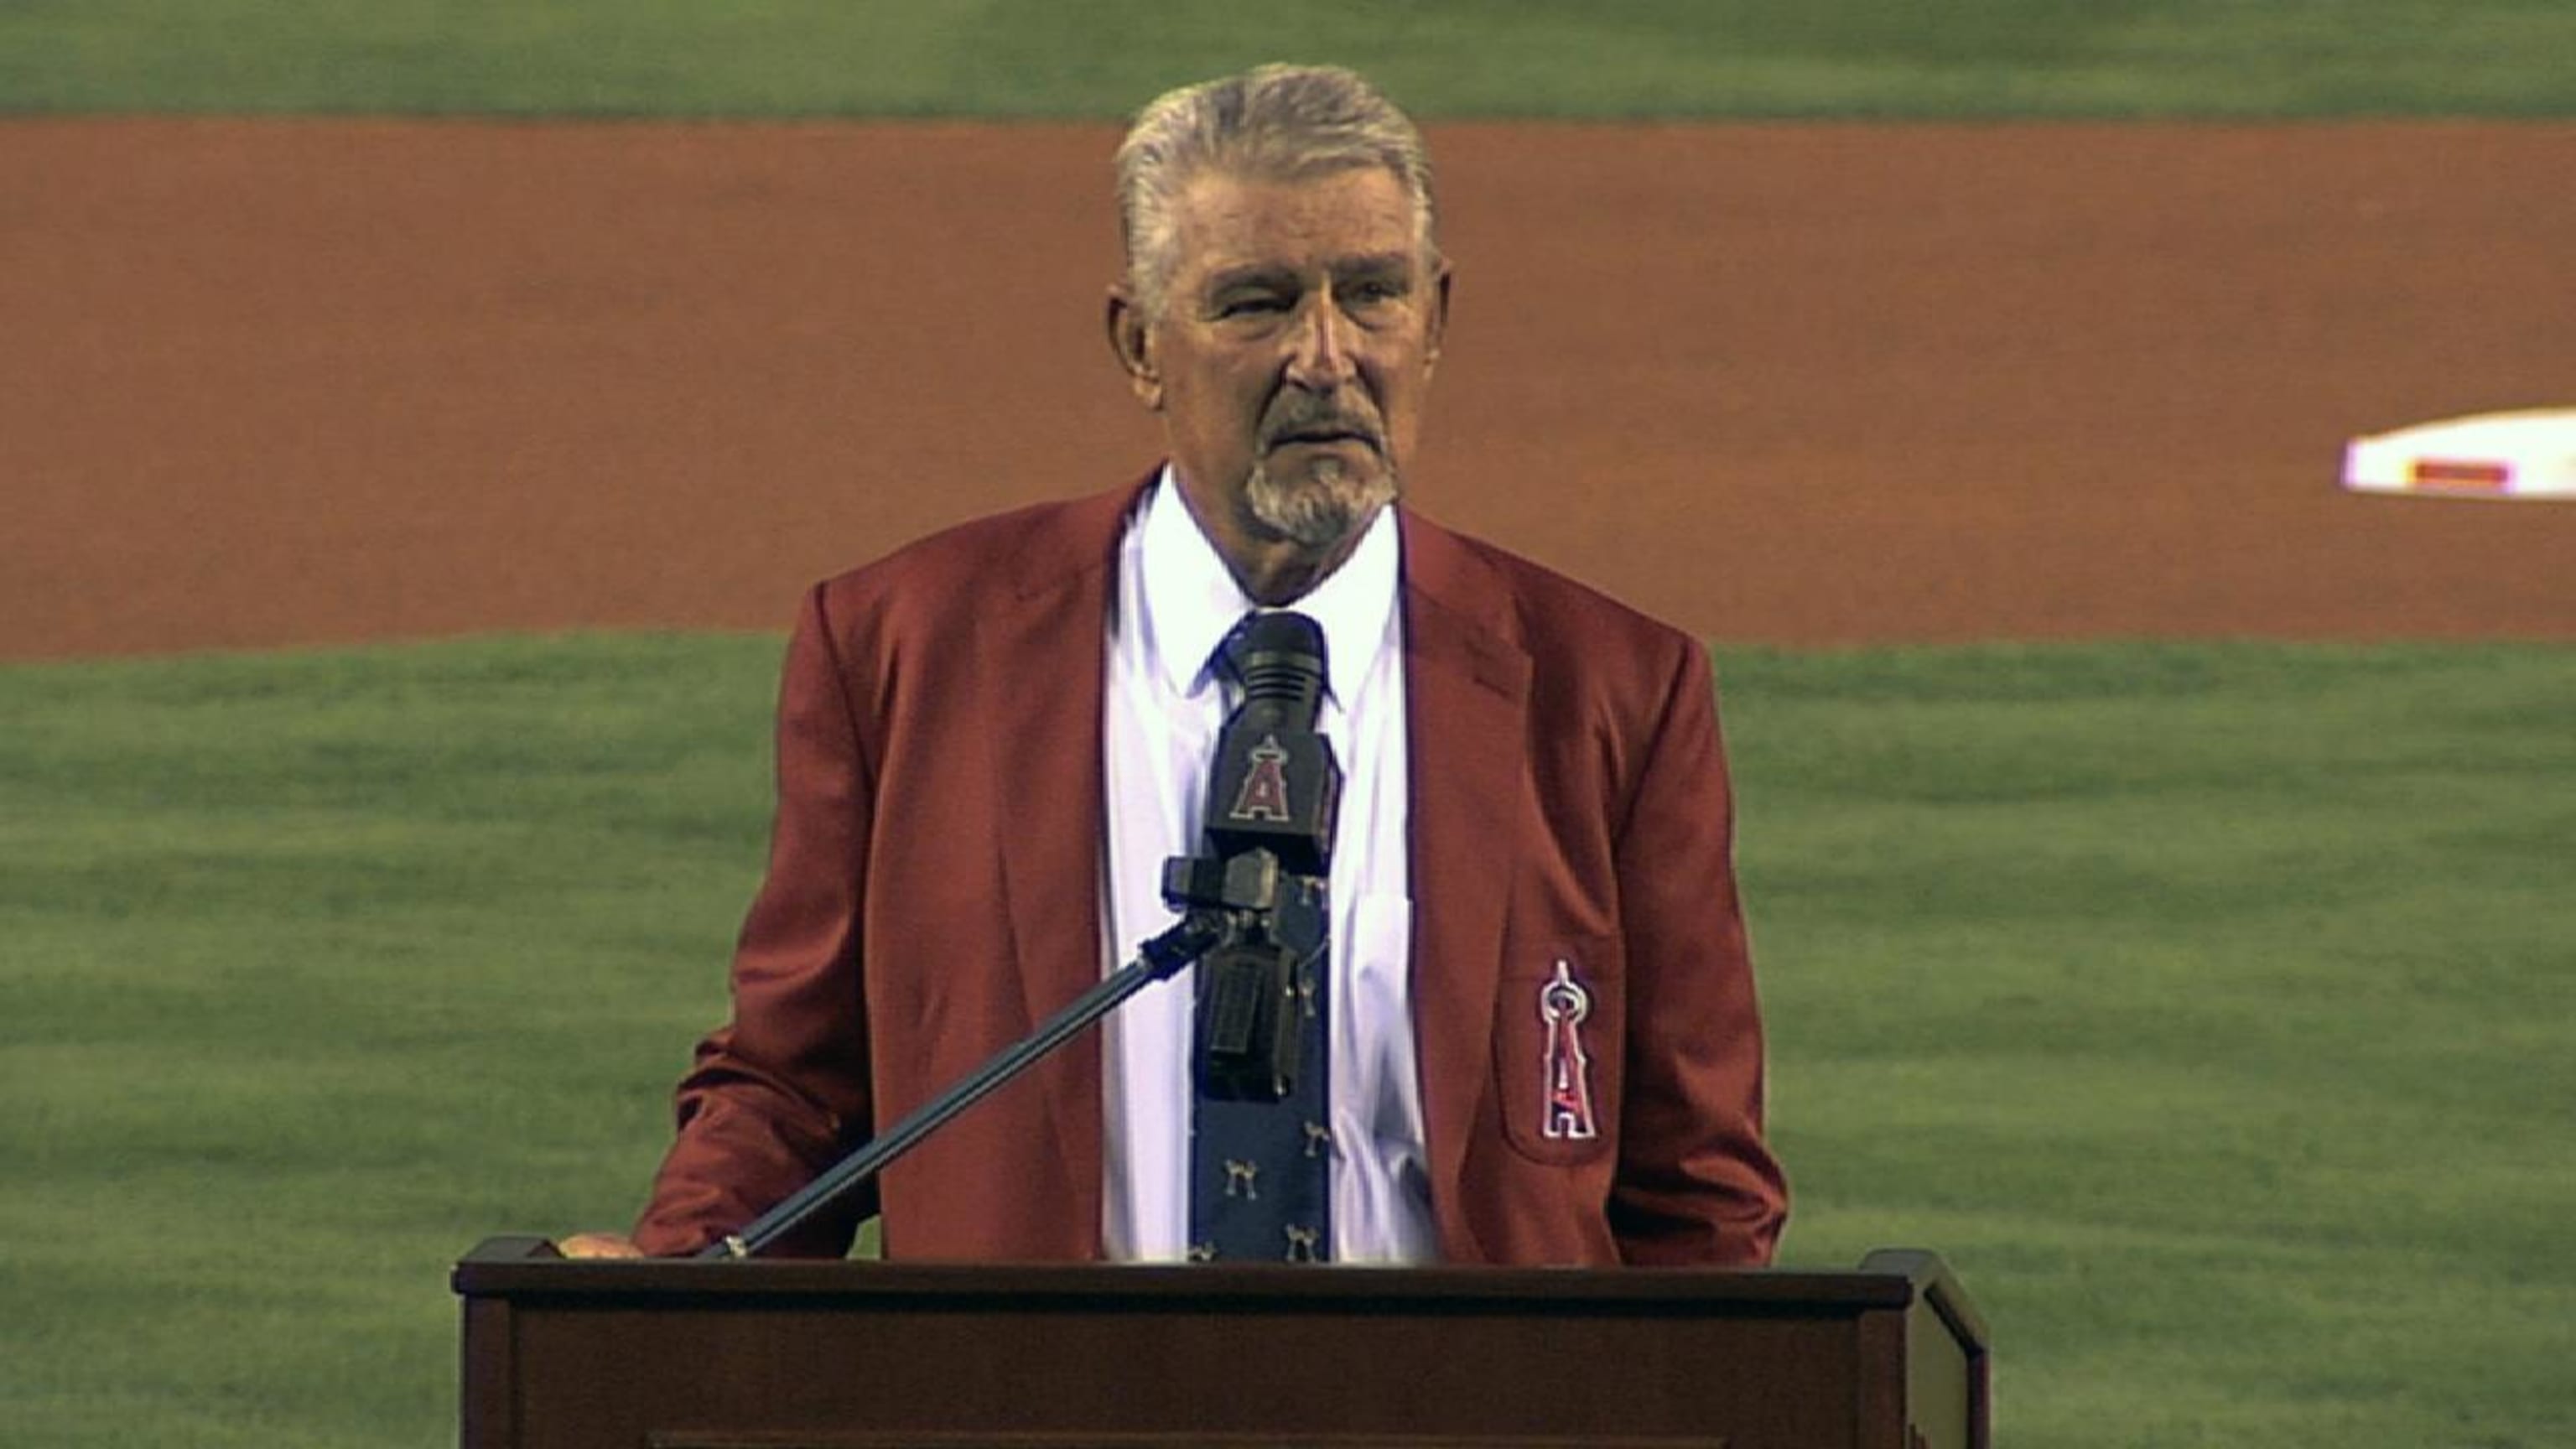 Bobby Knoop honored by Angels